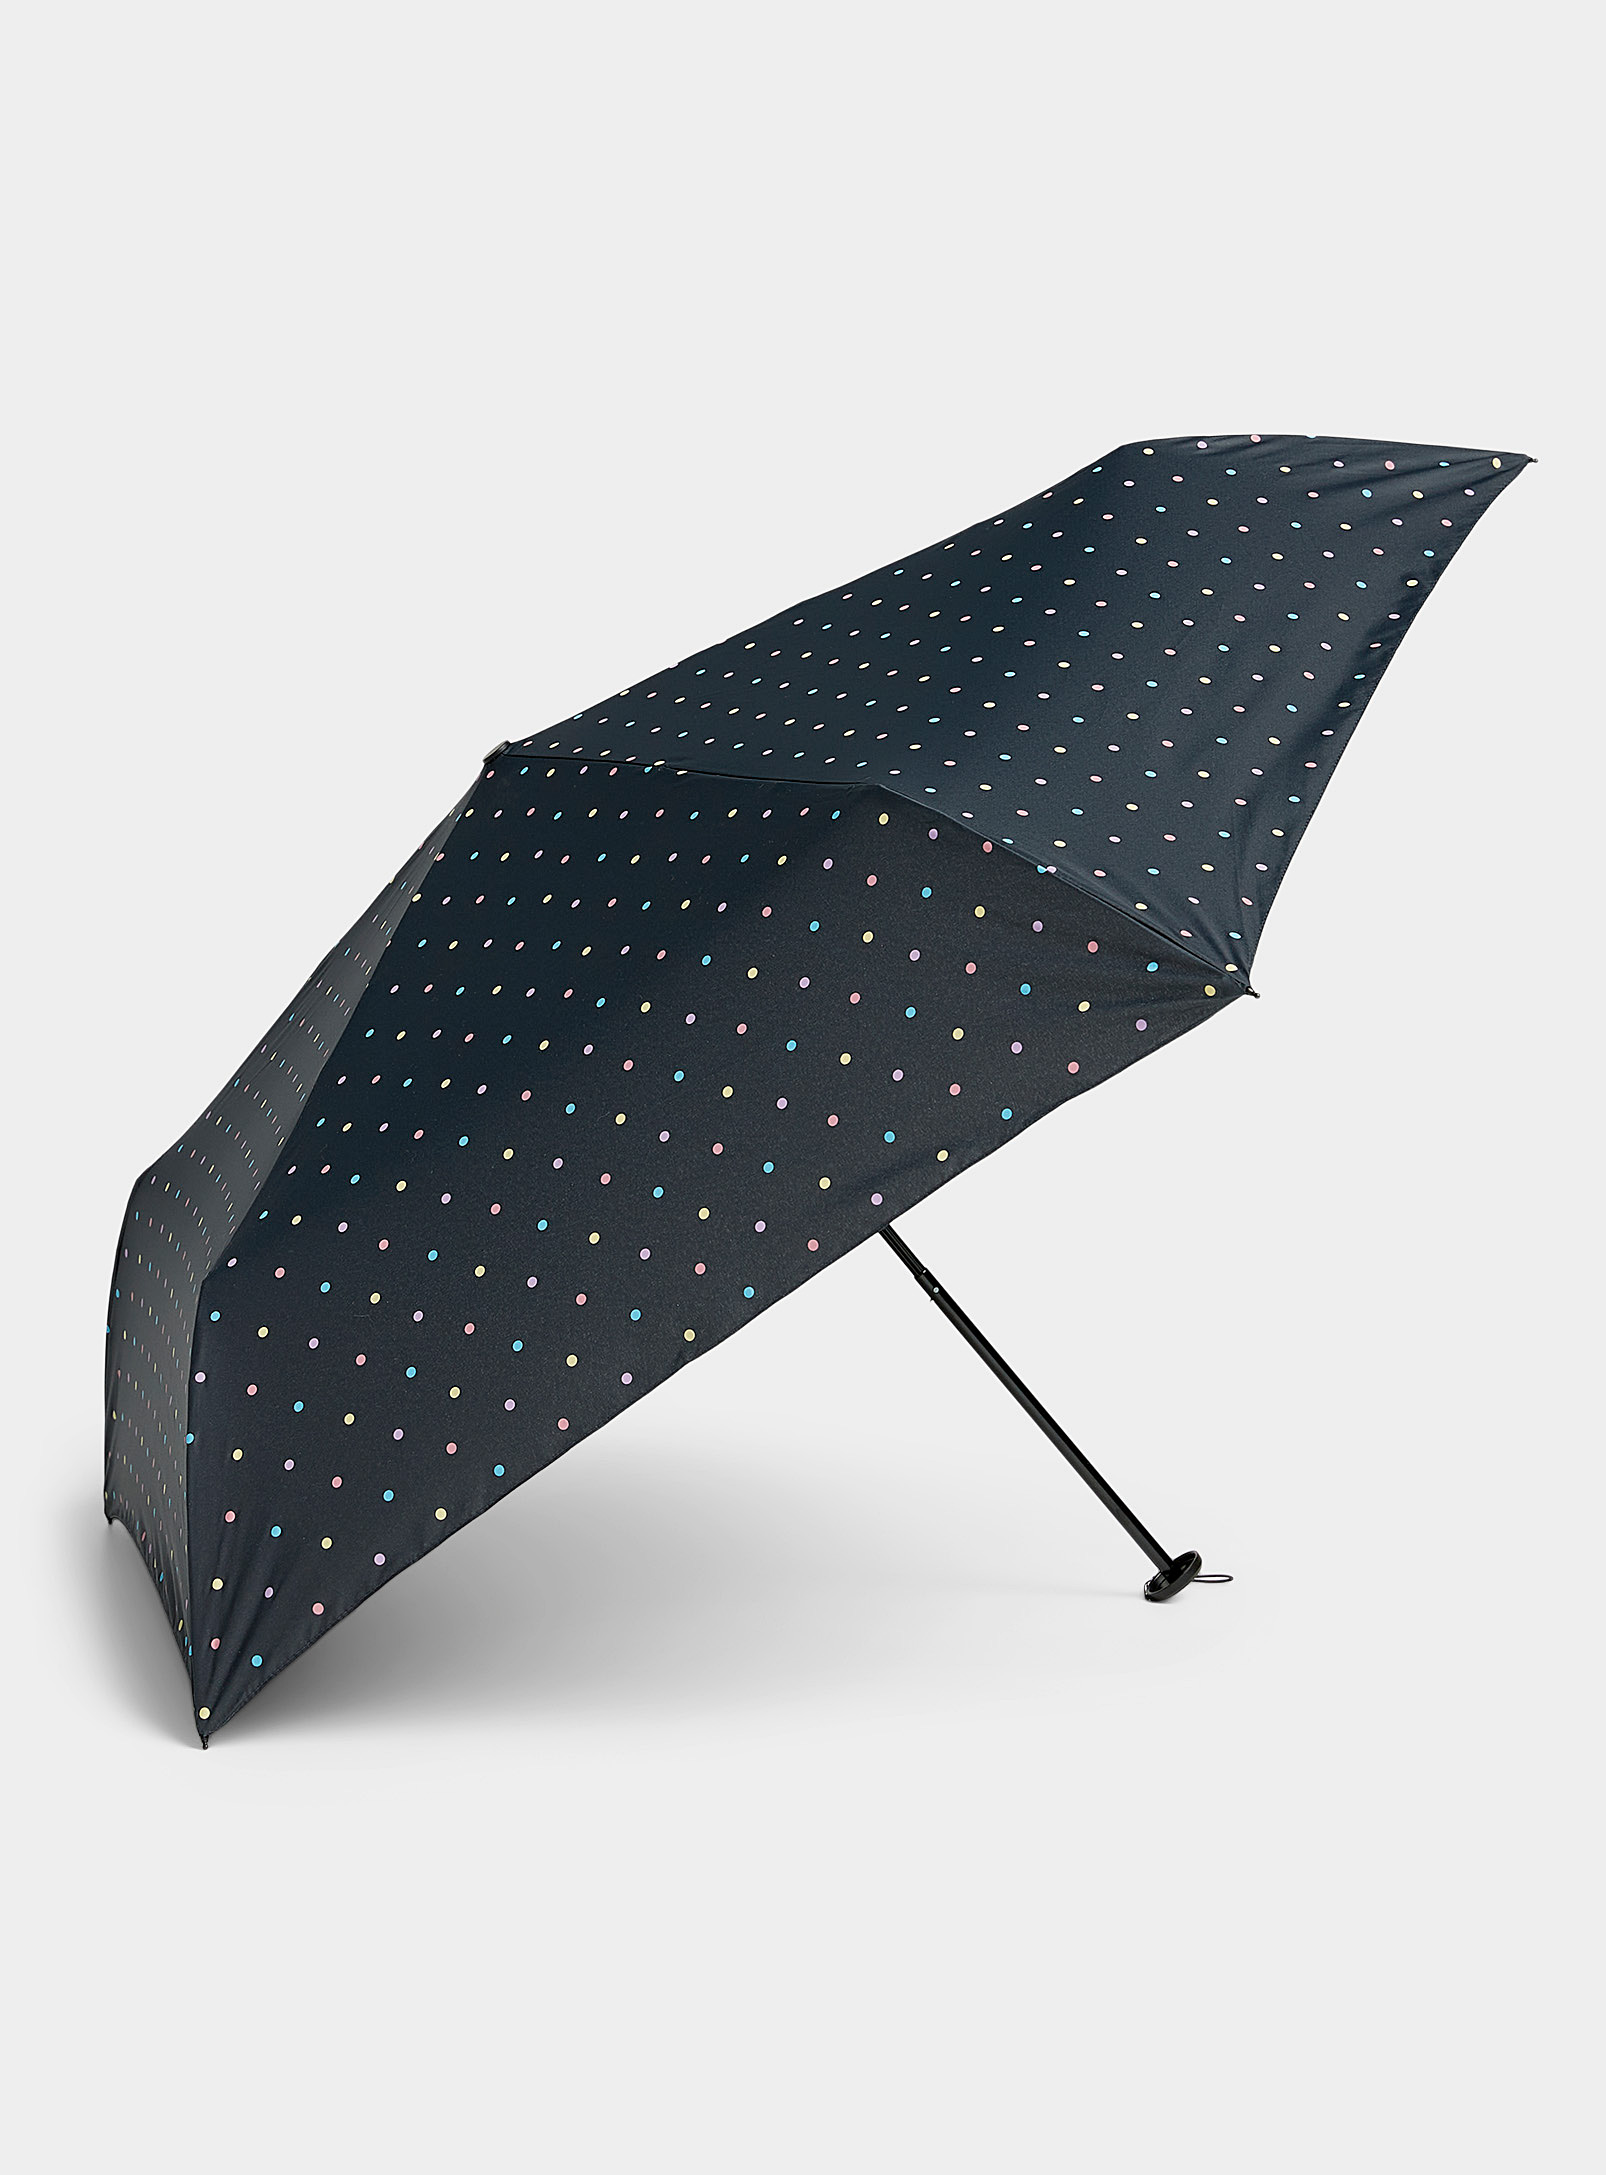 Fulton Patterned Ultra-compact Umbrella In Patterned Black